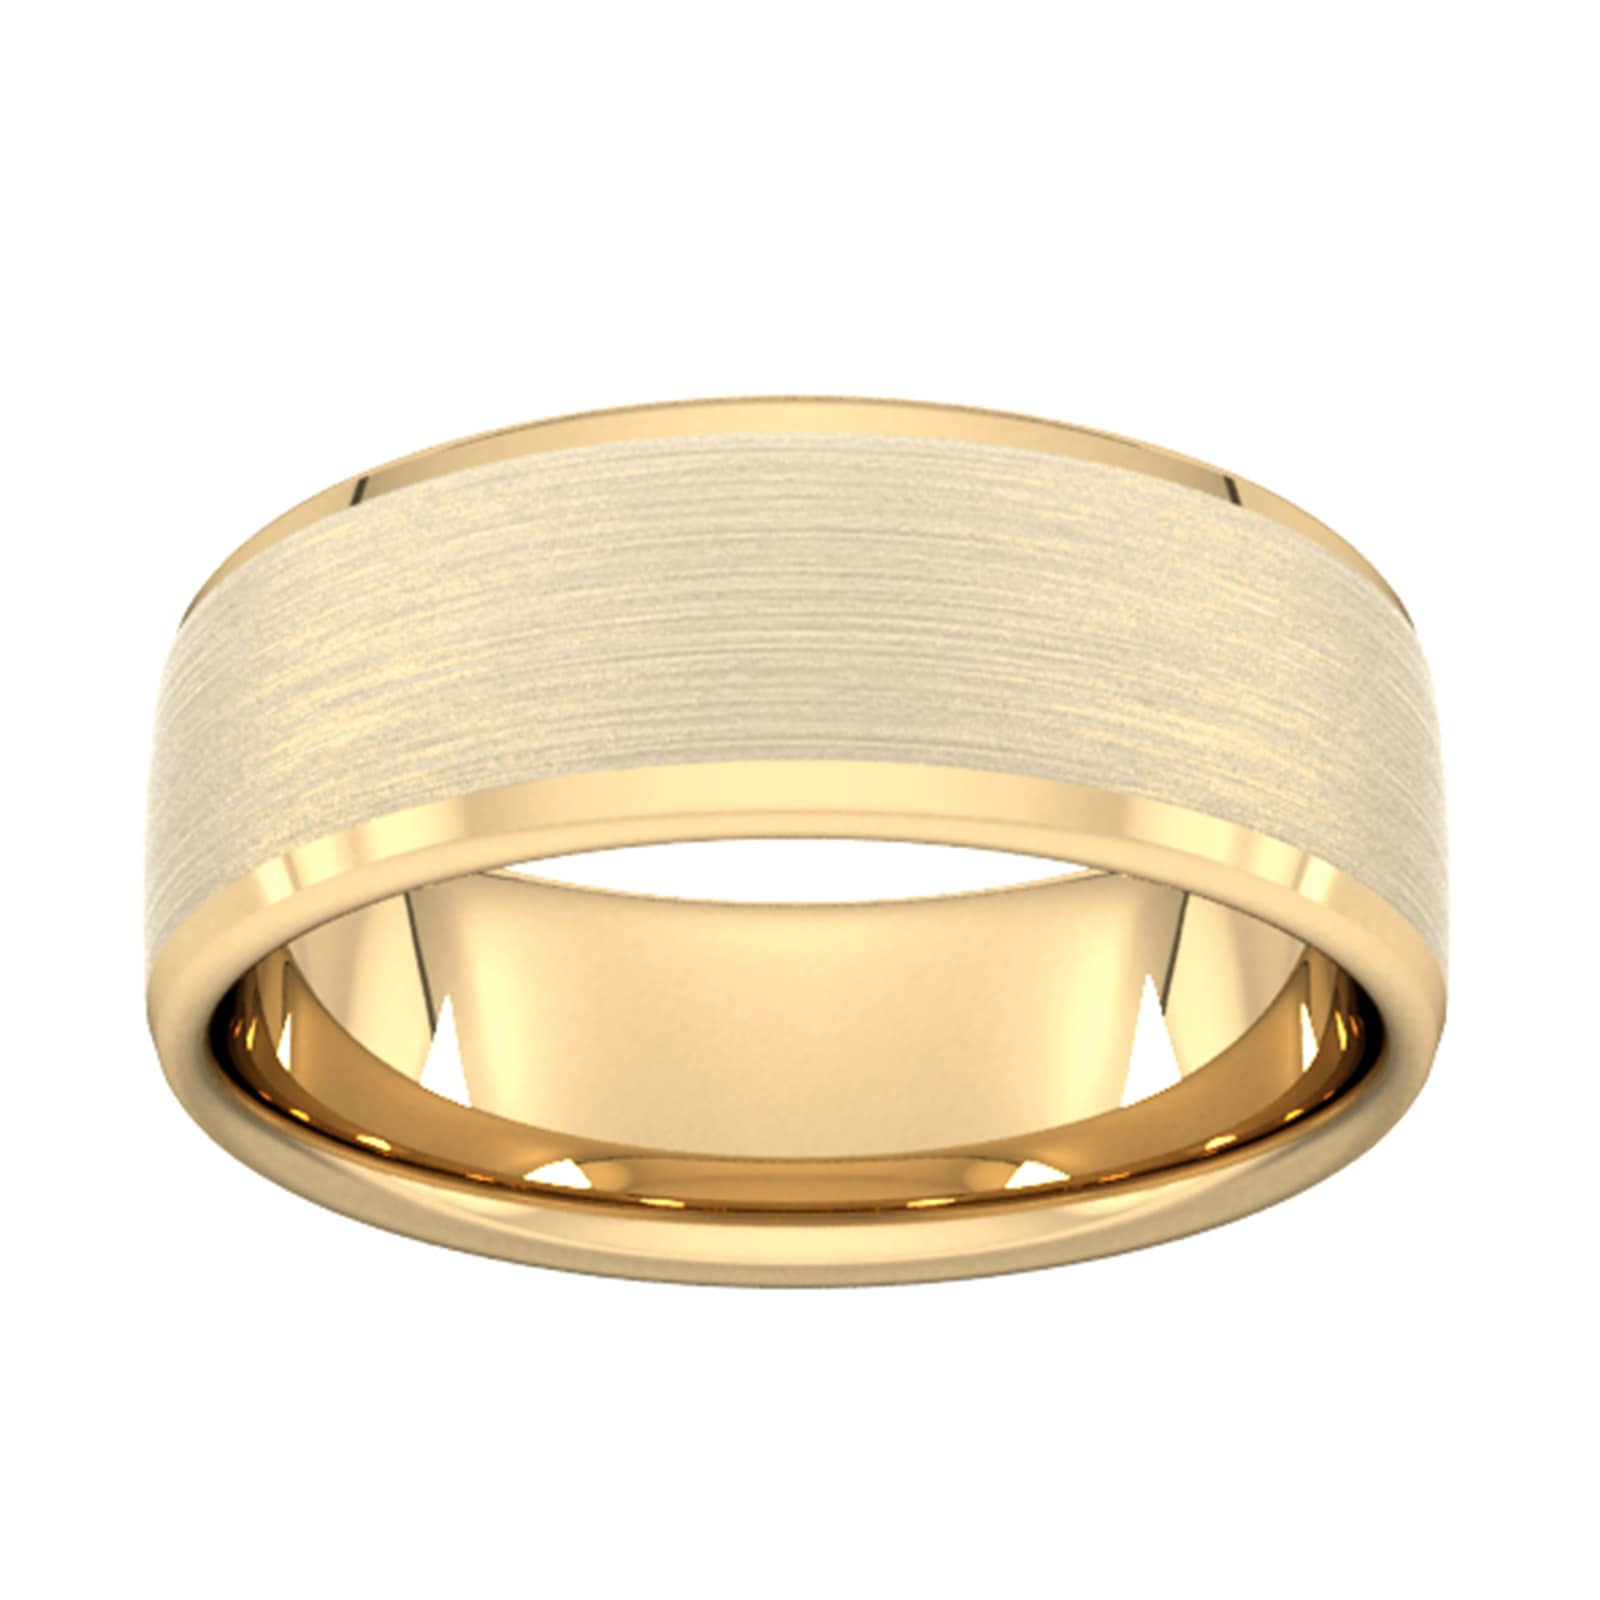 8mm Slight Court Extra Heavy Polished Chamfered Edges With Matt Centre Wedding Ring In 9 Carat Yellow Gold - Ring Size W